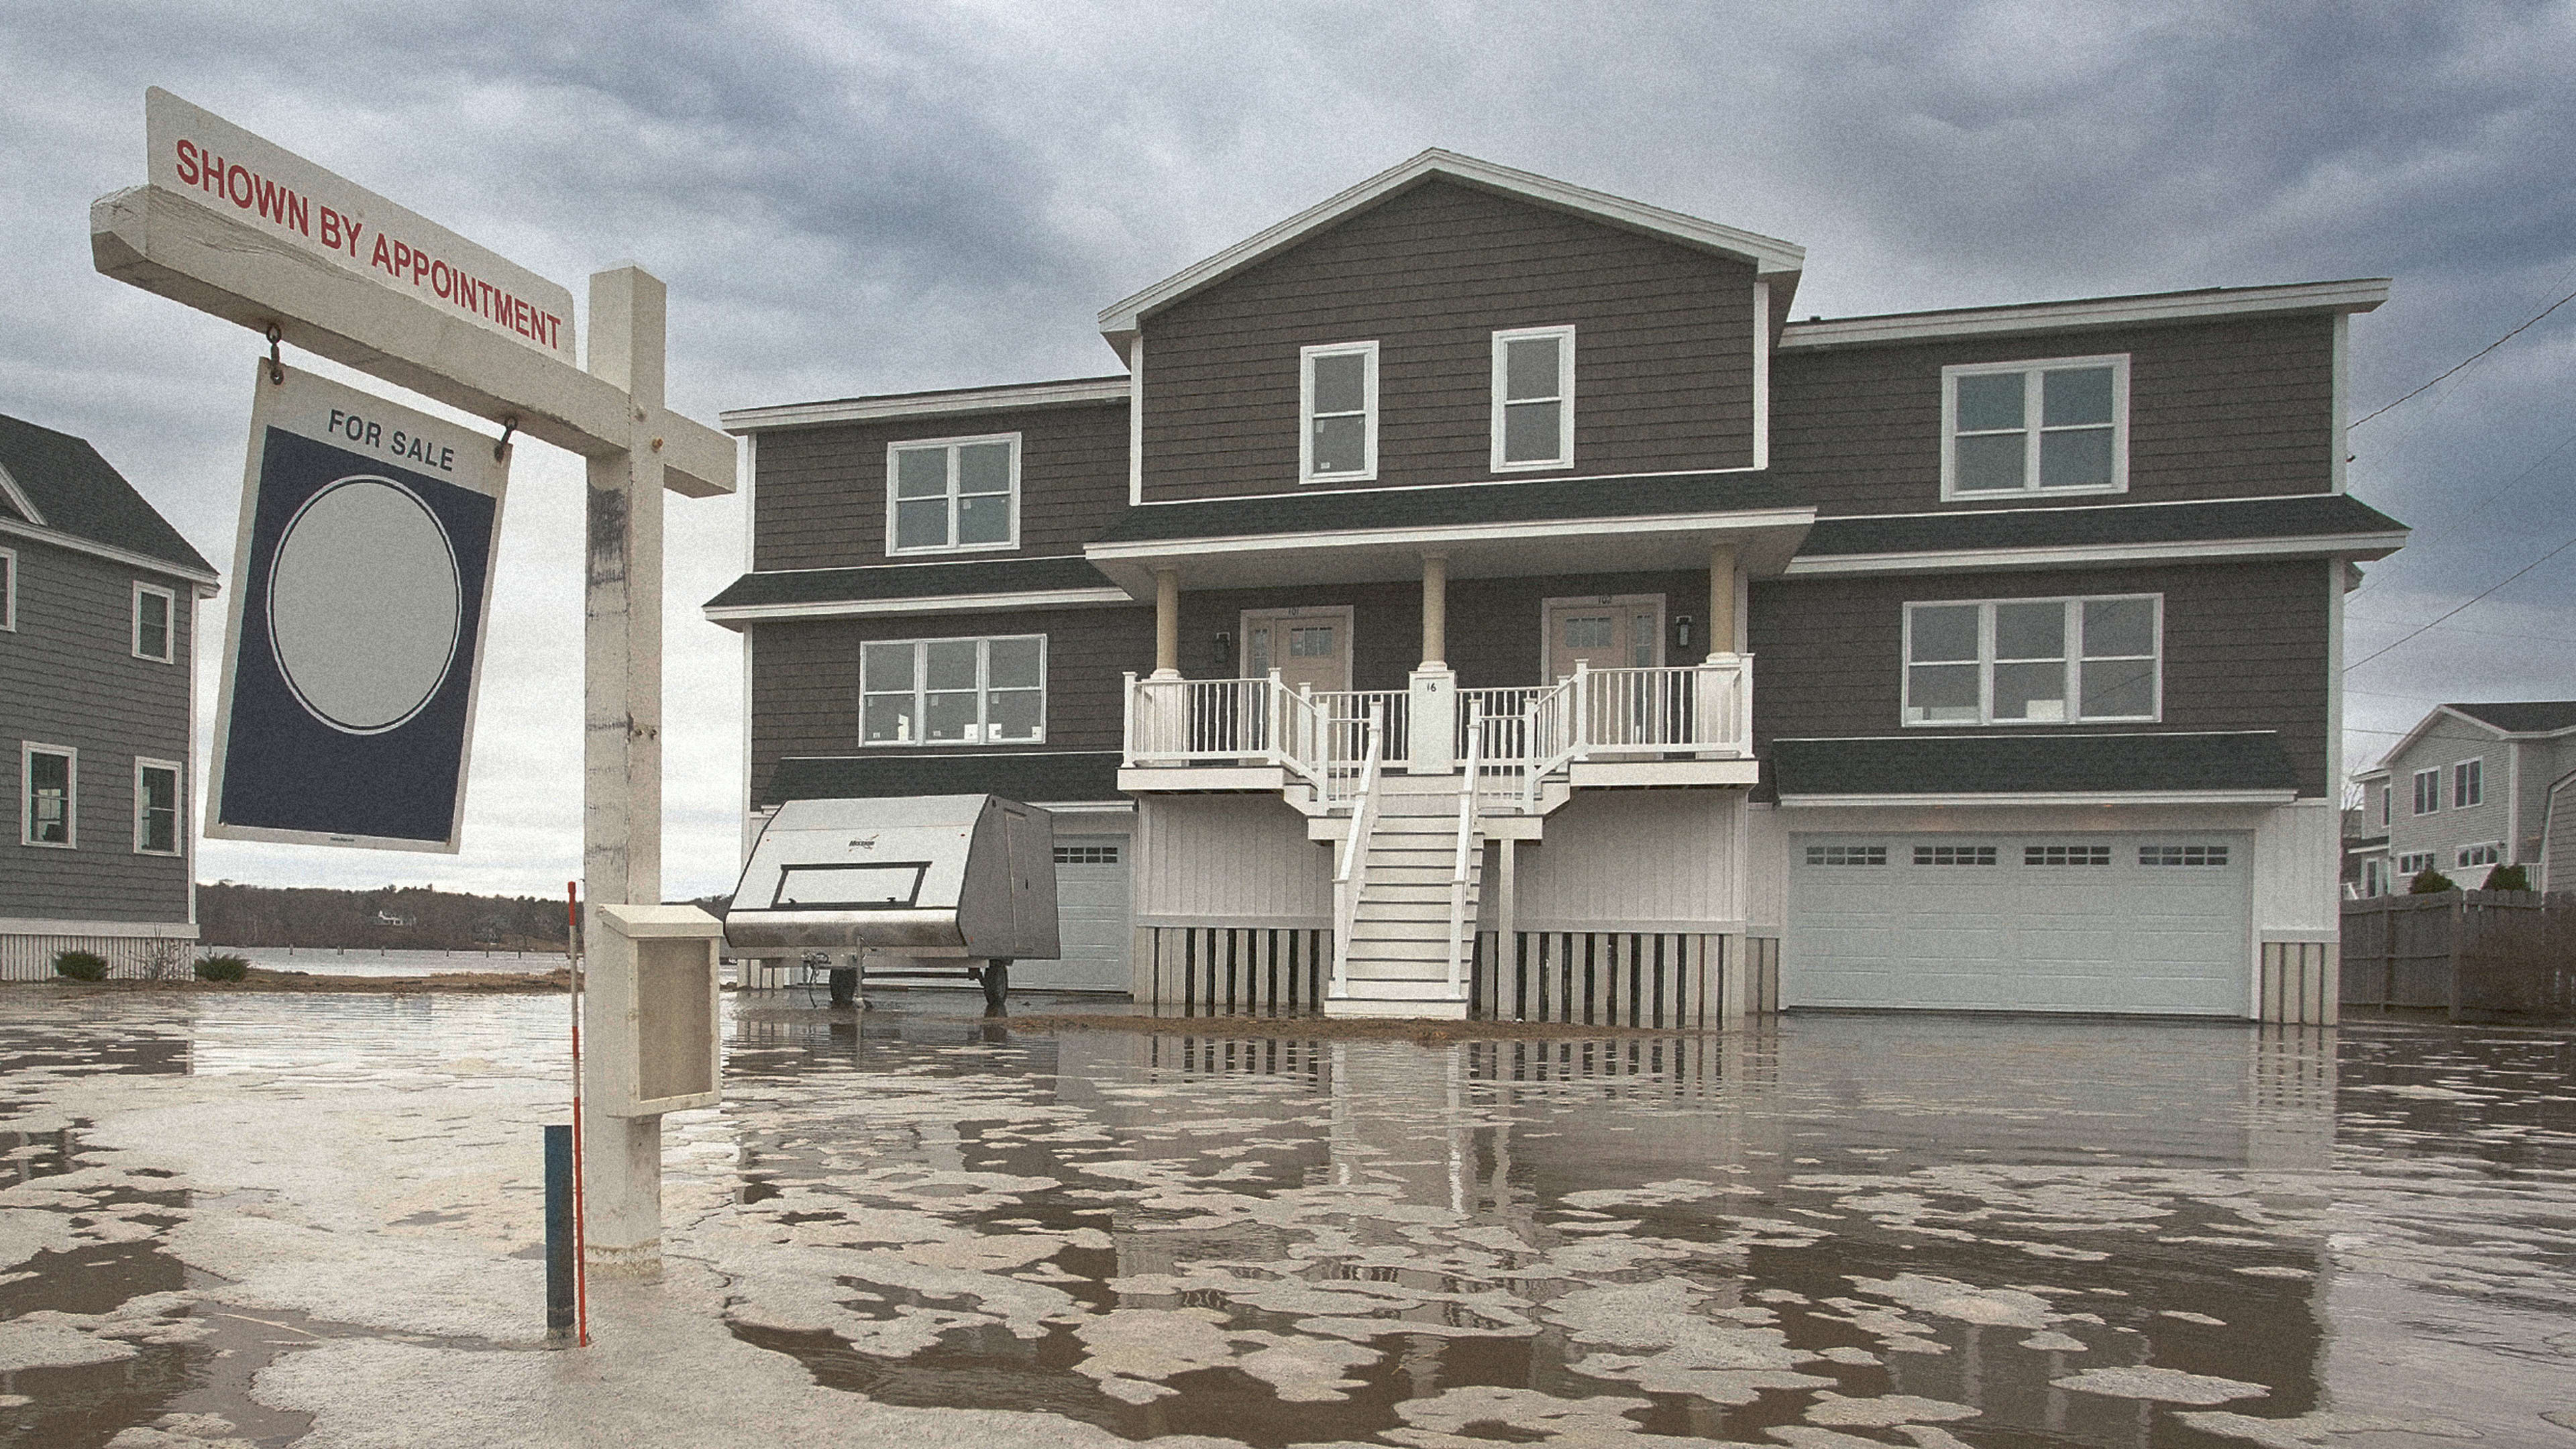 As sea levels rise, buying a coastal home is risky. What if you rented one from the government?